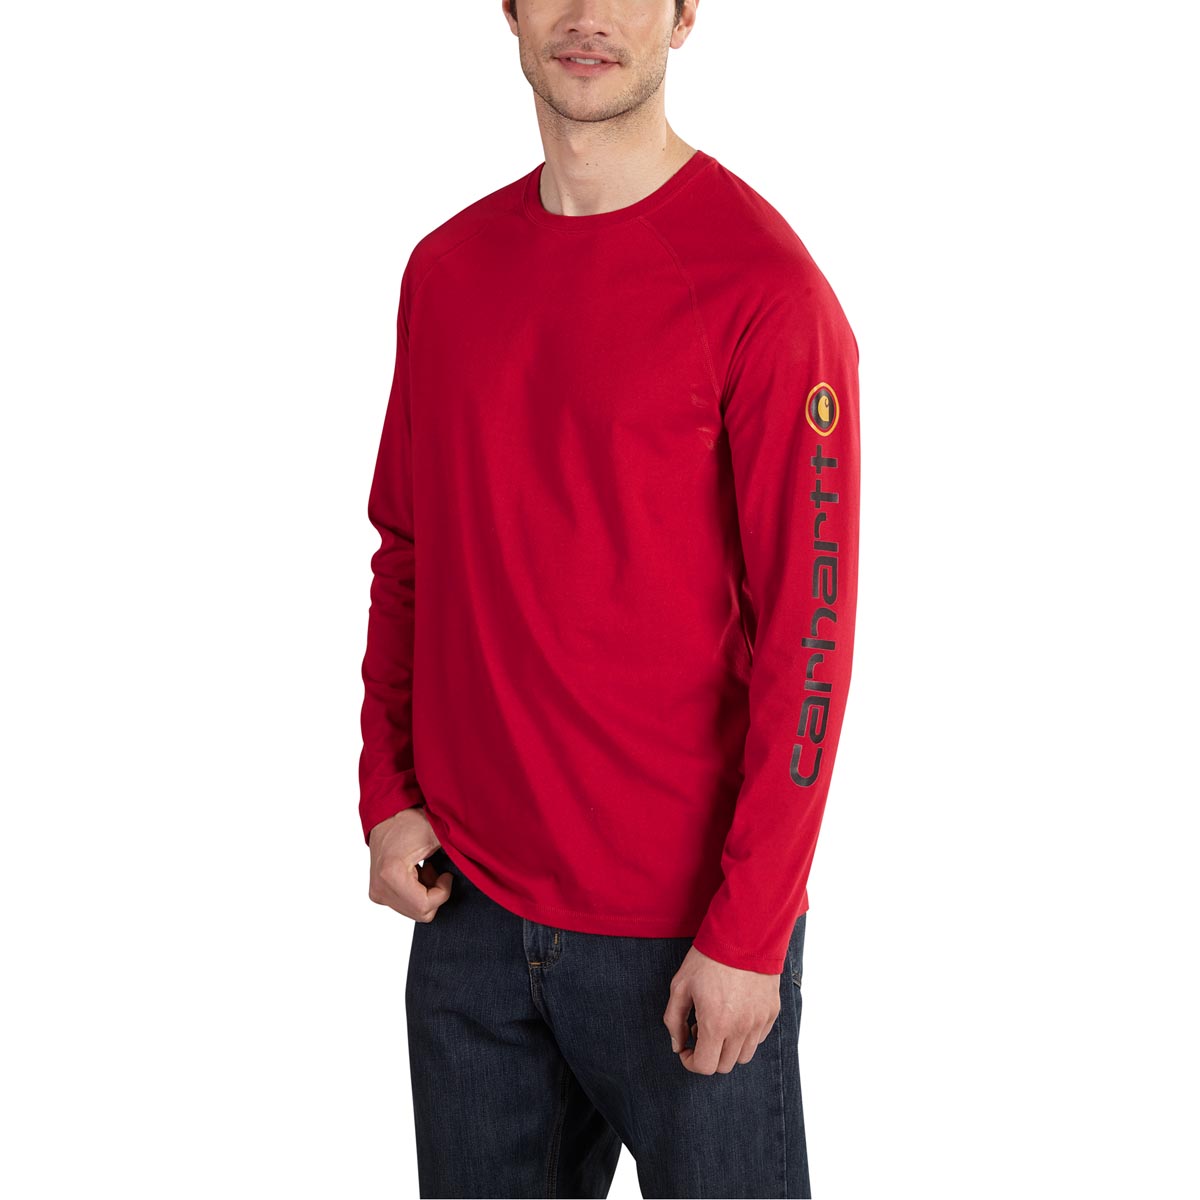 Carhartt Mens Force Cotton Delmont Sleeve Graphic T Shirt Discontinued Pricing